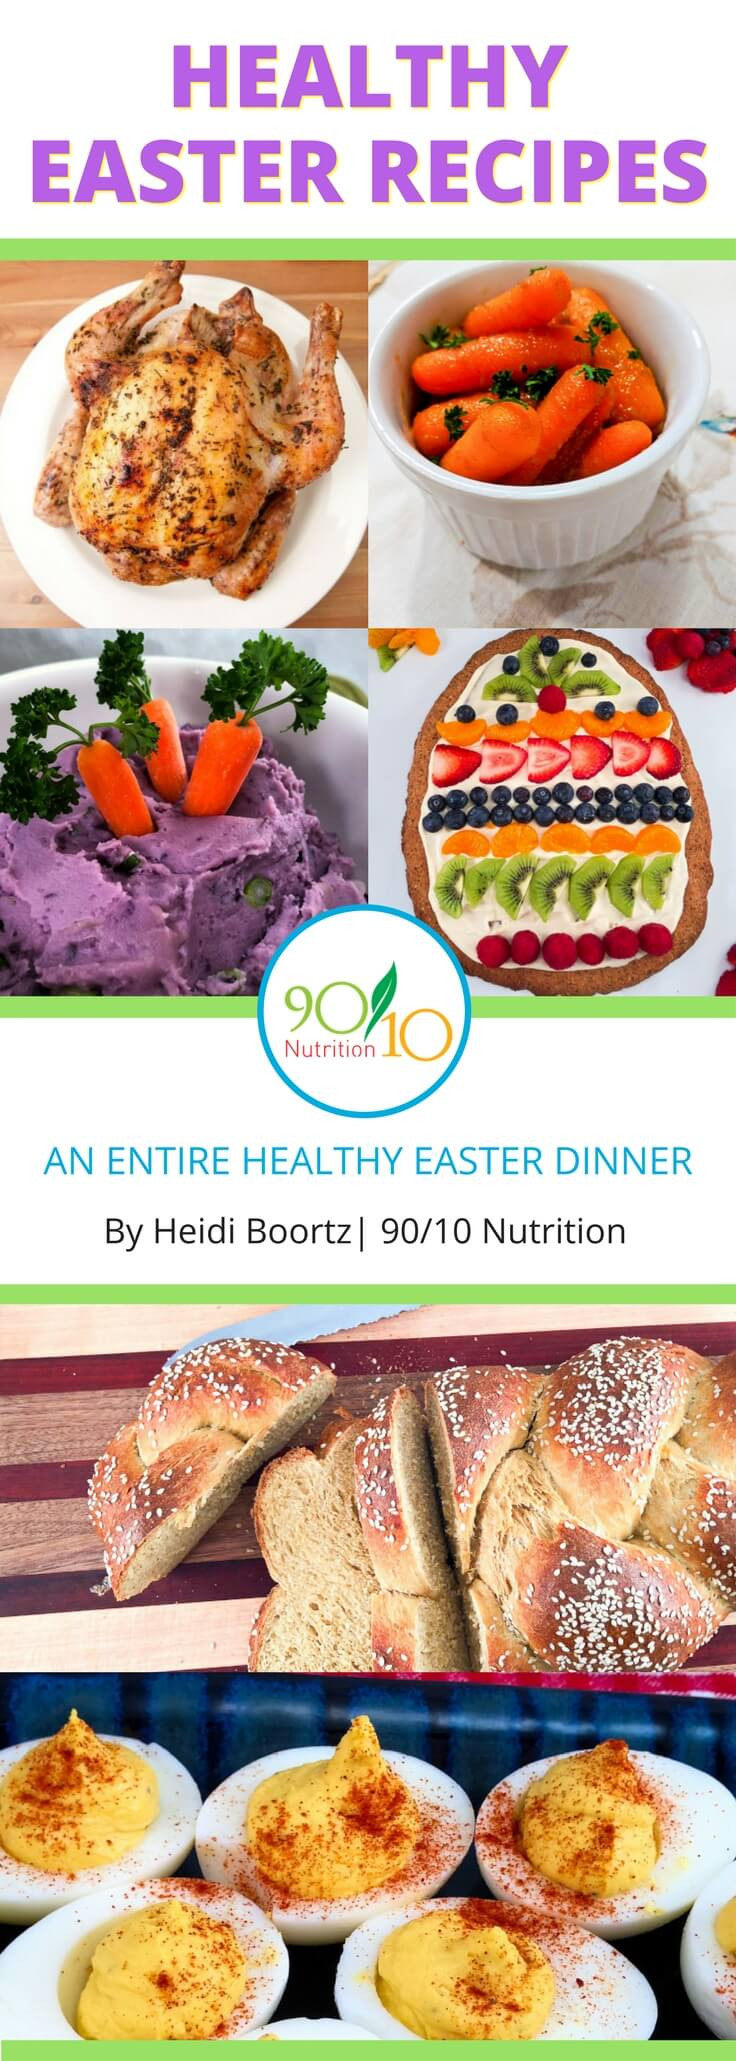 Healthy Easter Dinner Recipes
 Healthy Easter Recipes for a Healthy Easter Dinner 90 10